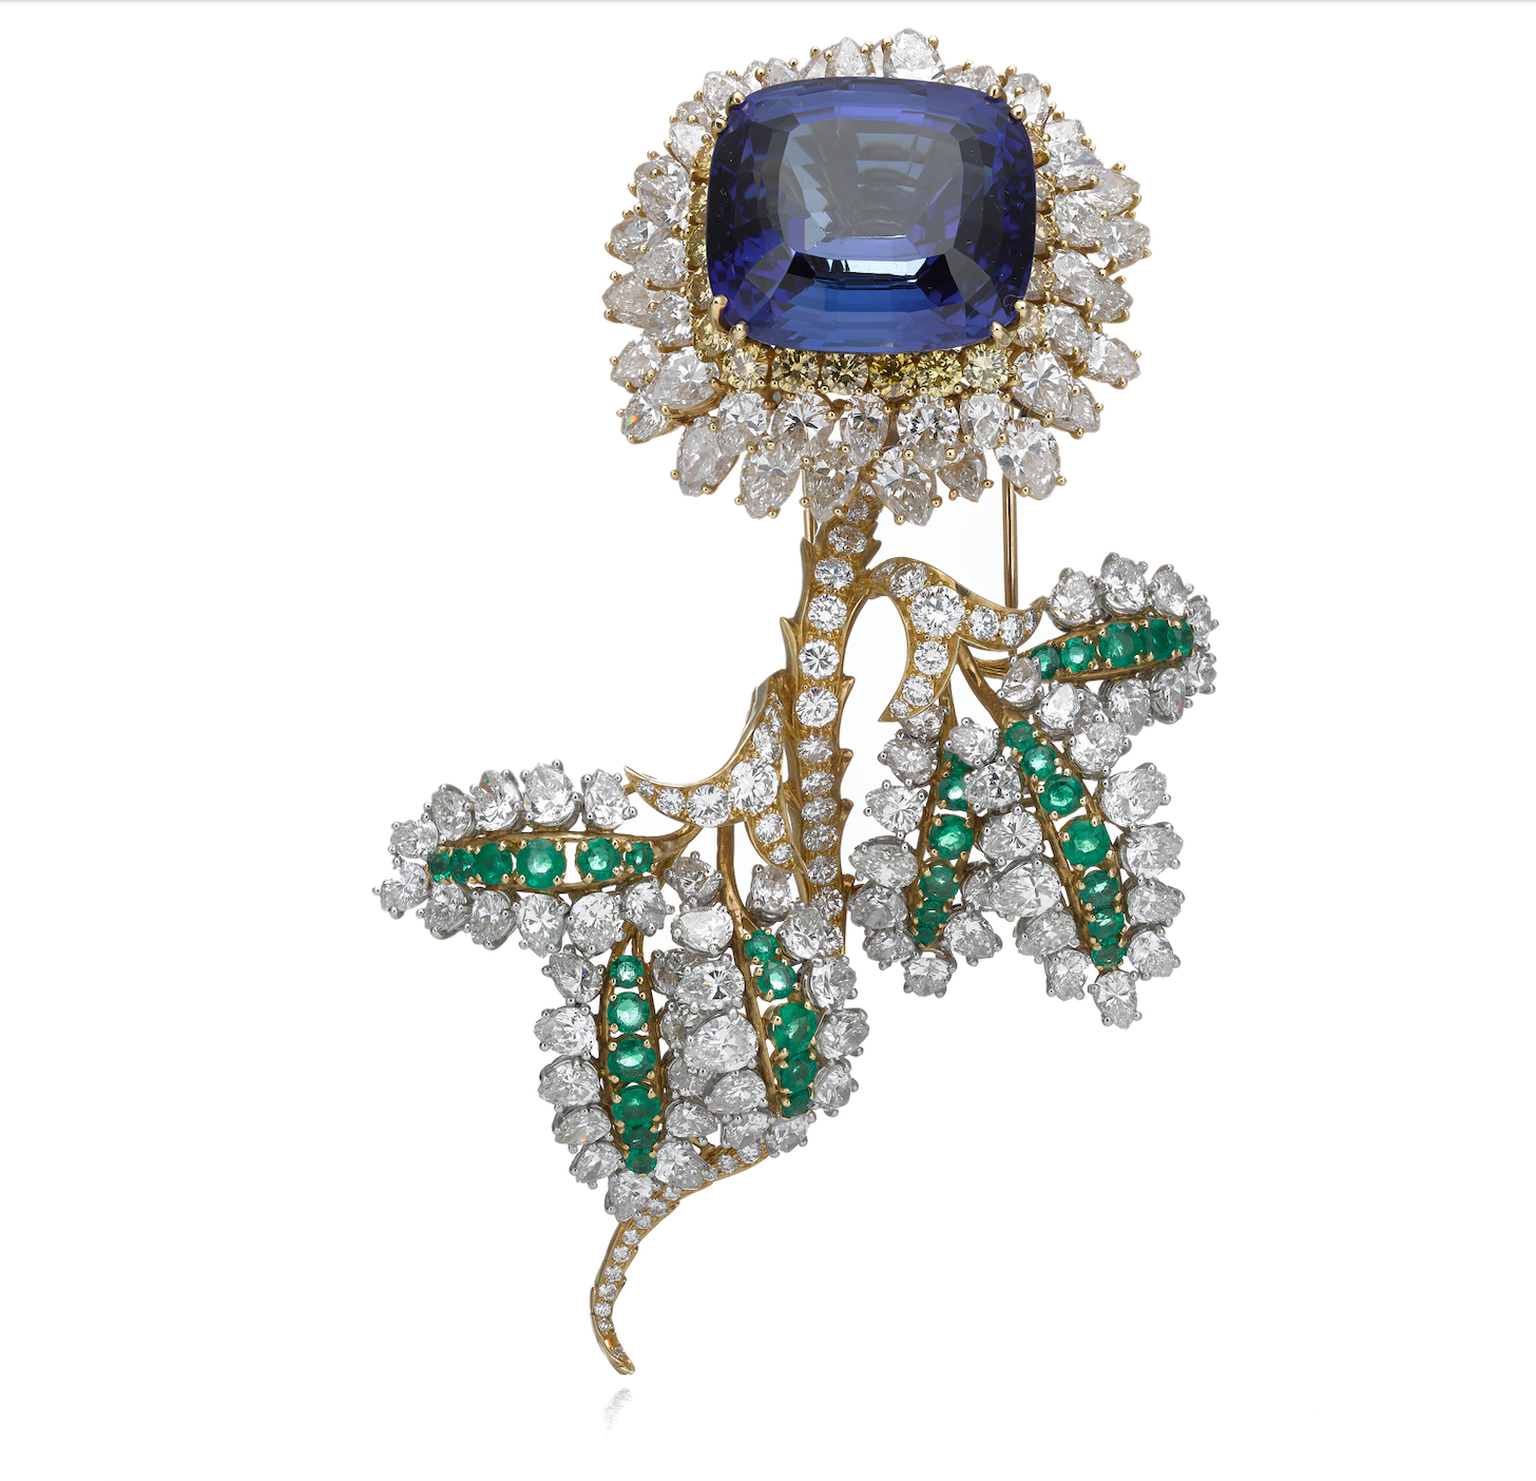 The influence of colour in high jewellery through the decades